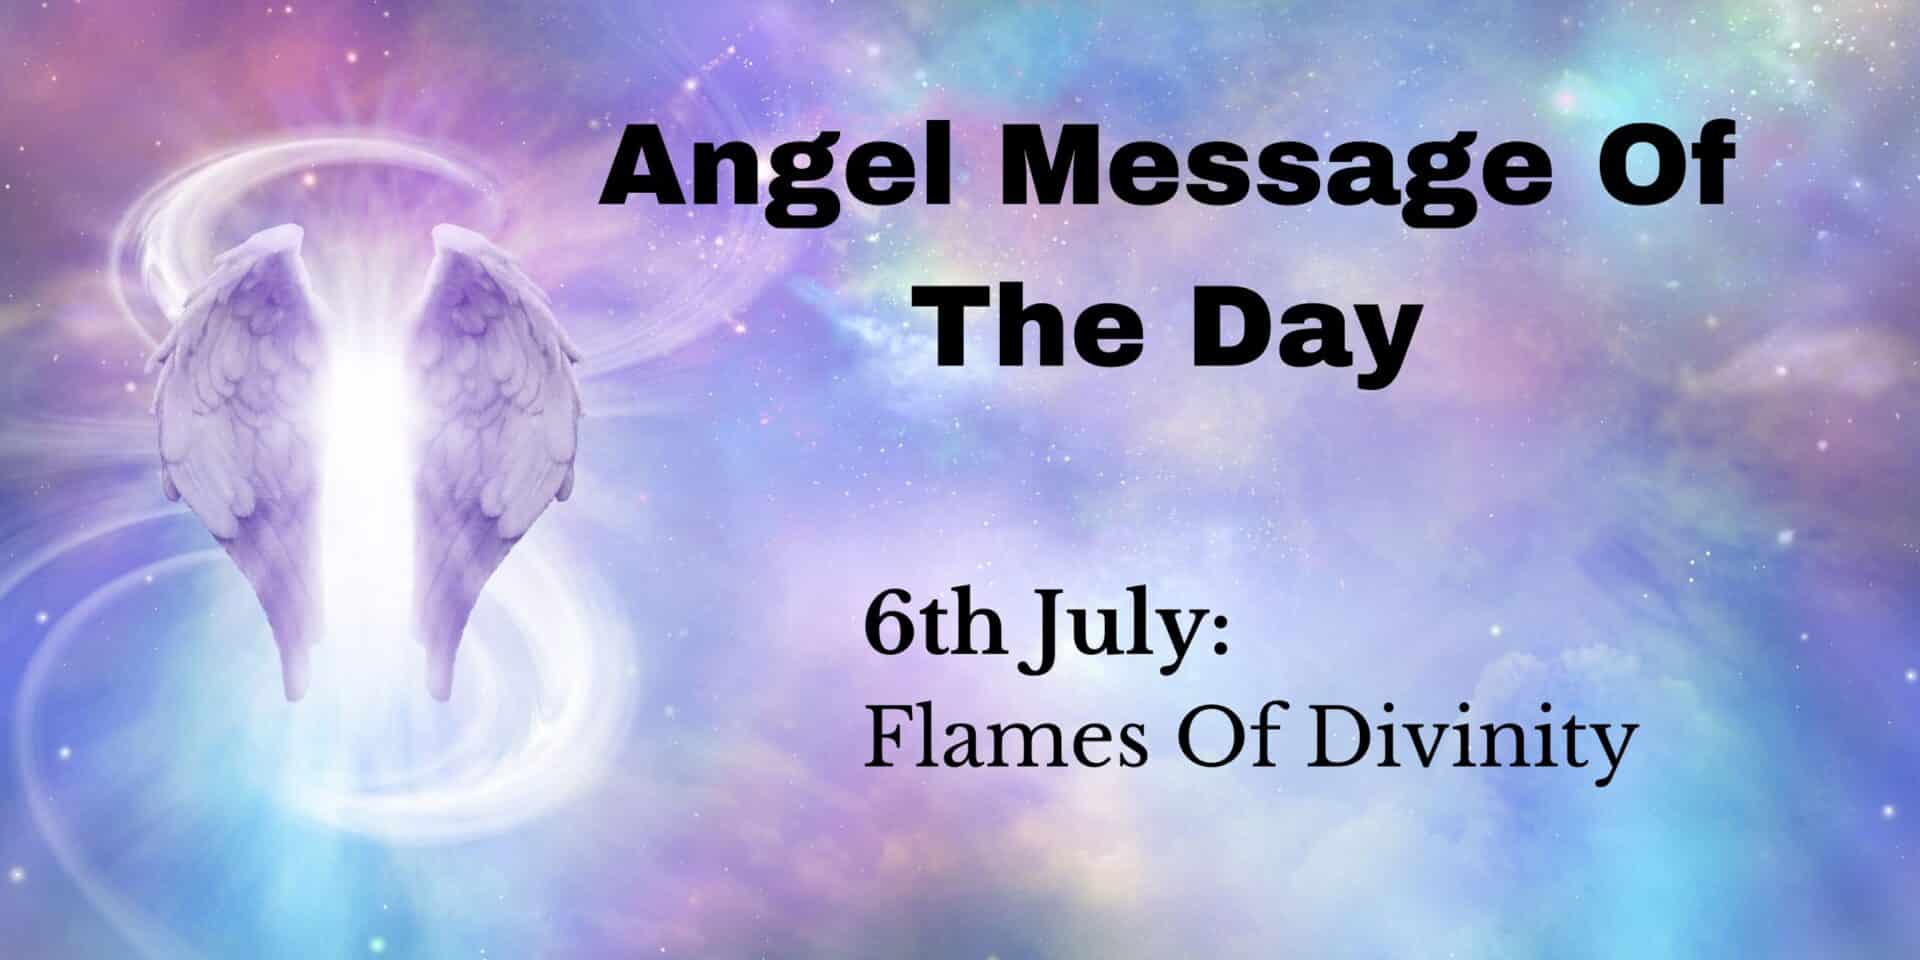 angel message of the day, flames of divinity